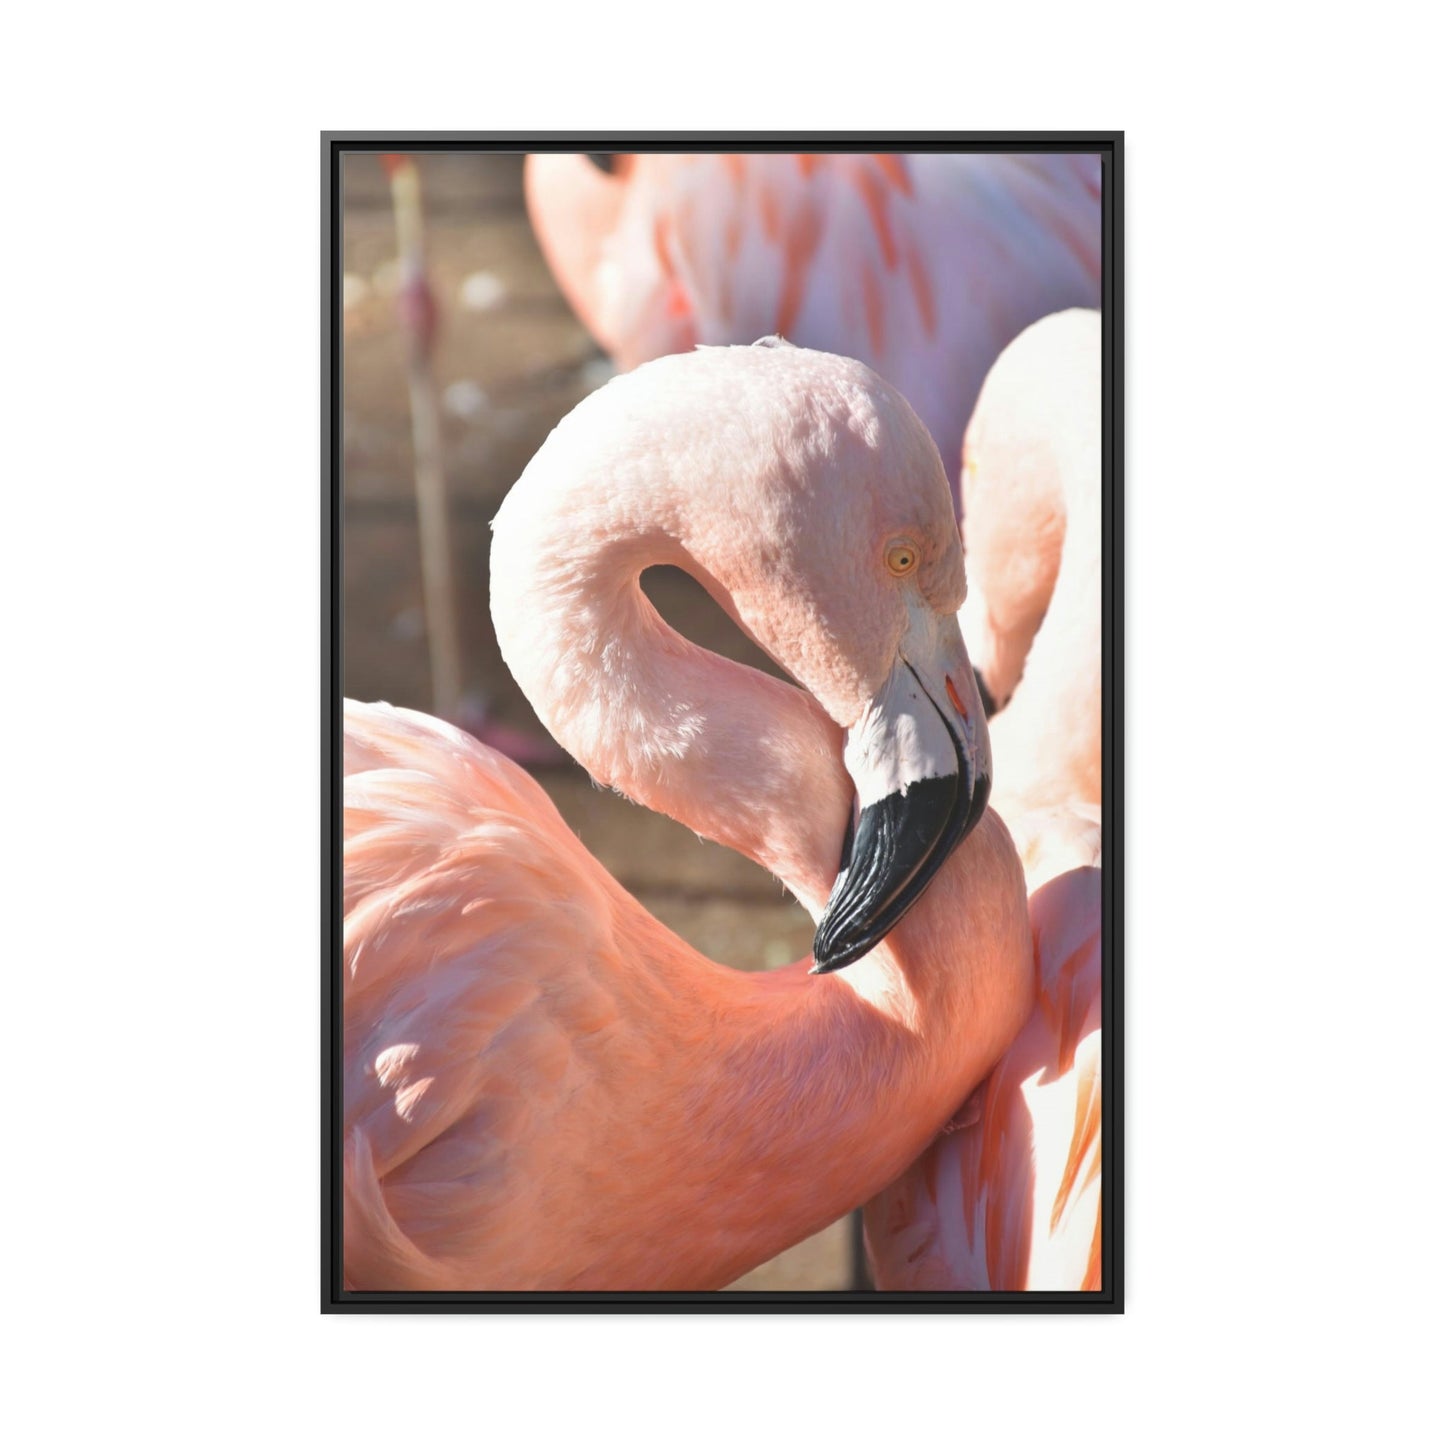 Flamingo Reflections: A Canvas of Stillness and Serenity